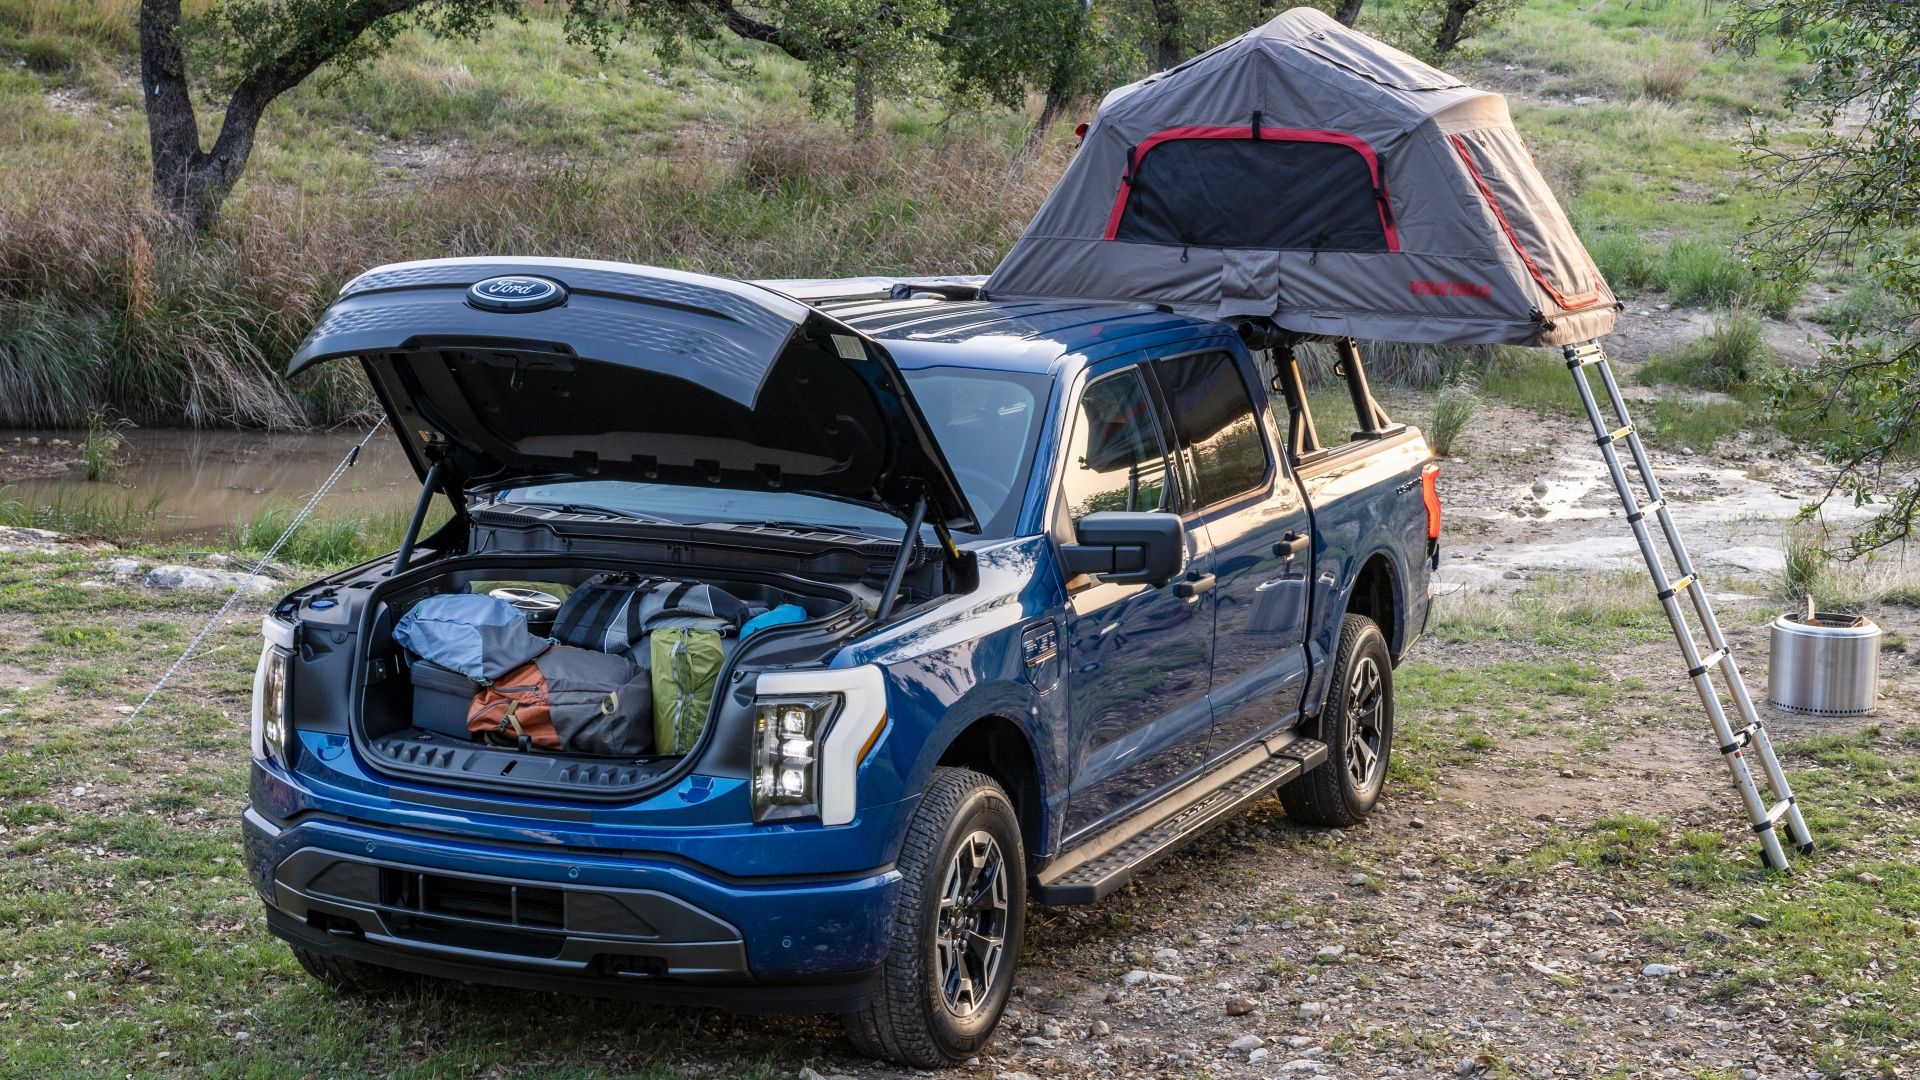 A blue-colored Ford F-150 Lightning is shown with its front trunk fully loaded and a tent attached to its bed at a campsite